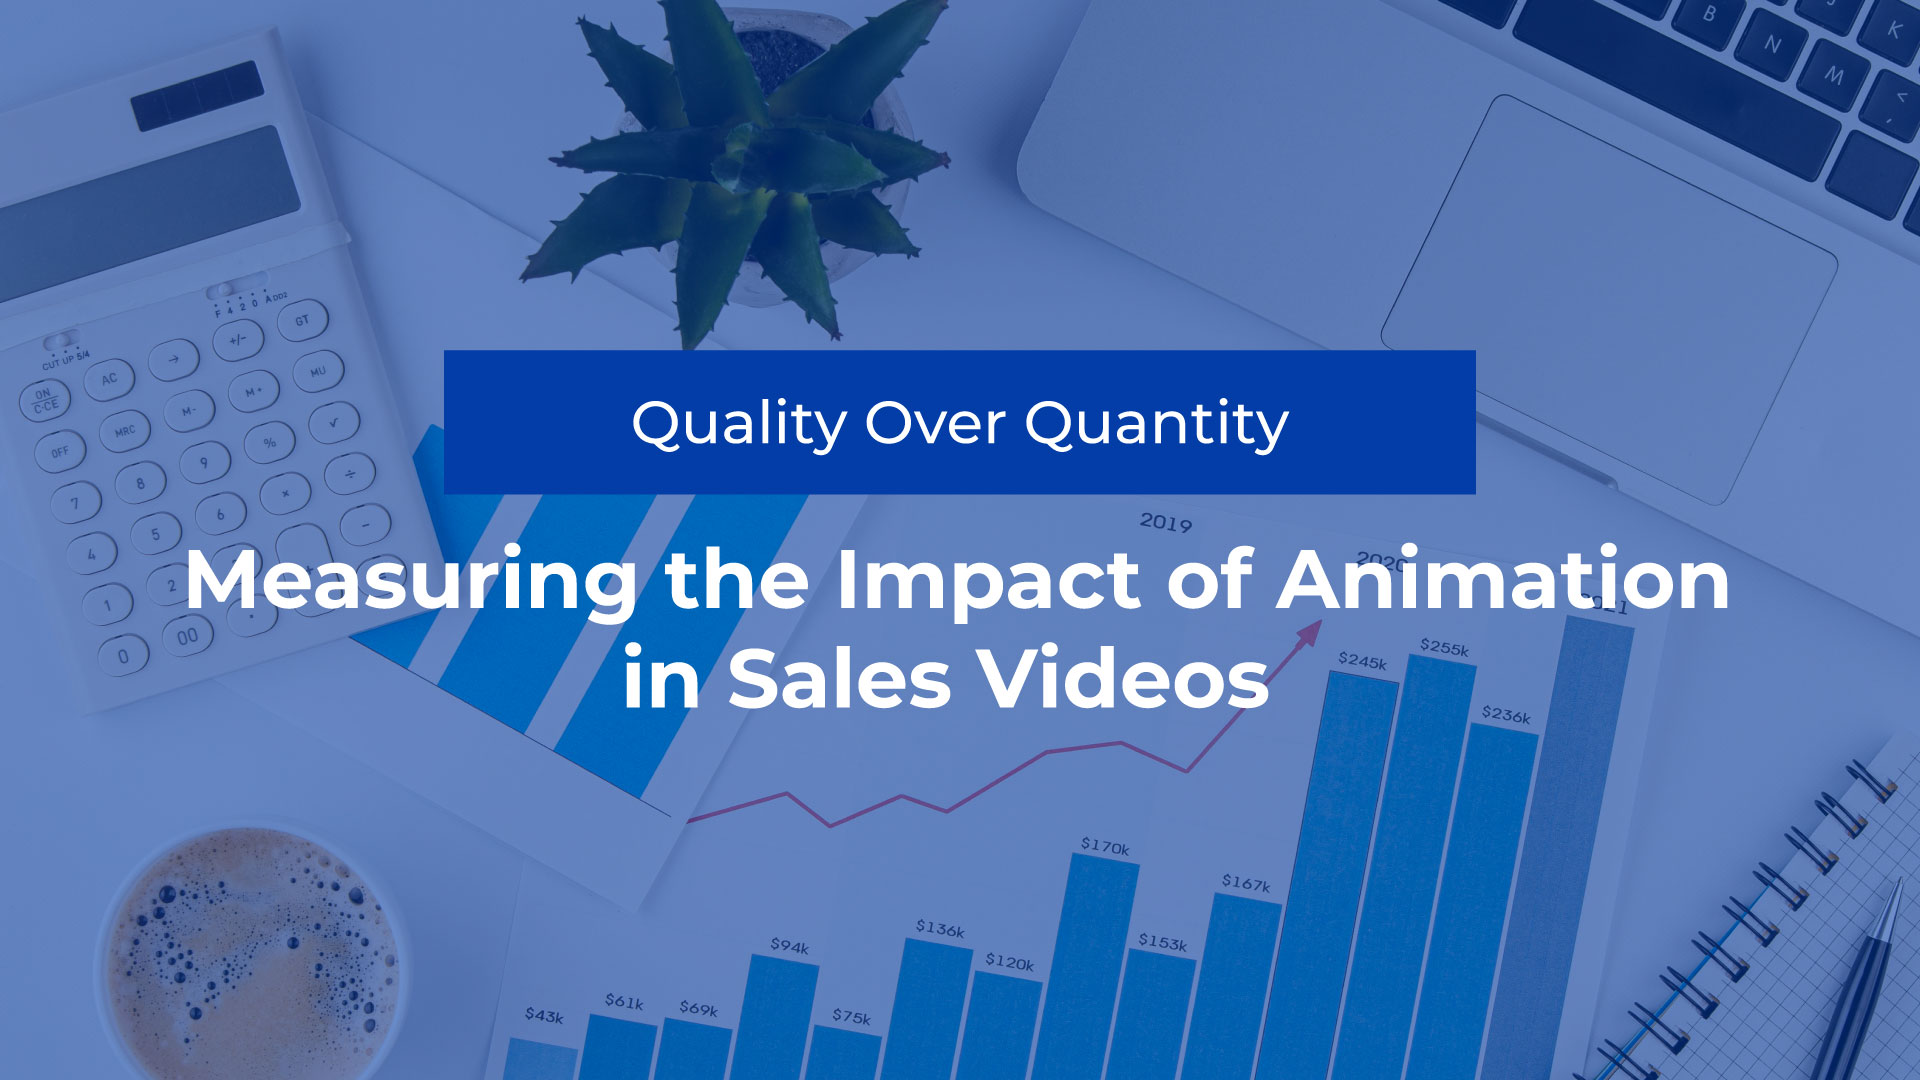 Measuring the Impact of Animation in Sales Videos - Quality Over Quantity